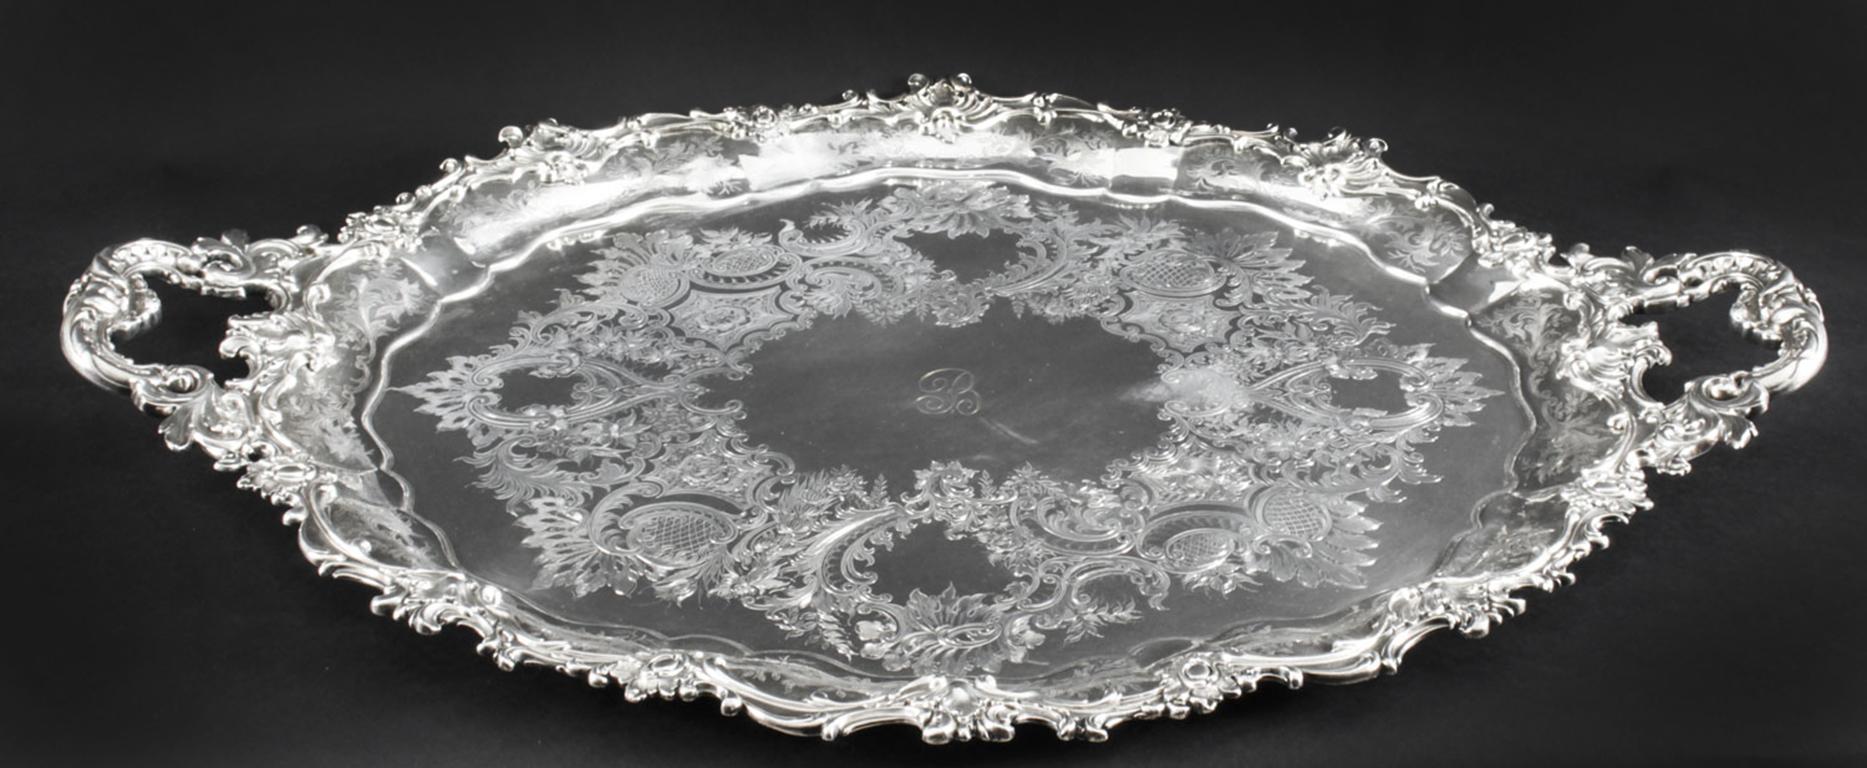 English Antique Victorian Oval Silver Plated Tray by Manoah Rhodes, 19th Century